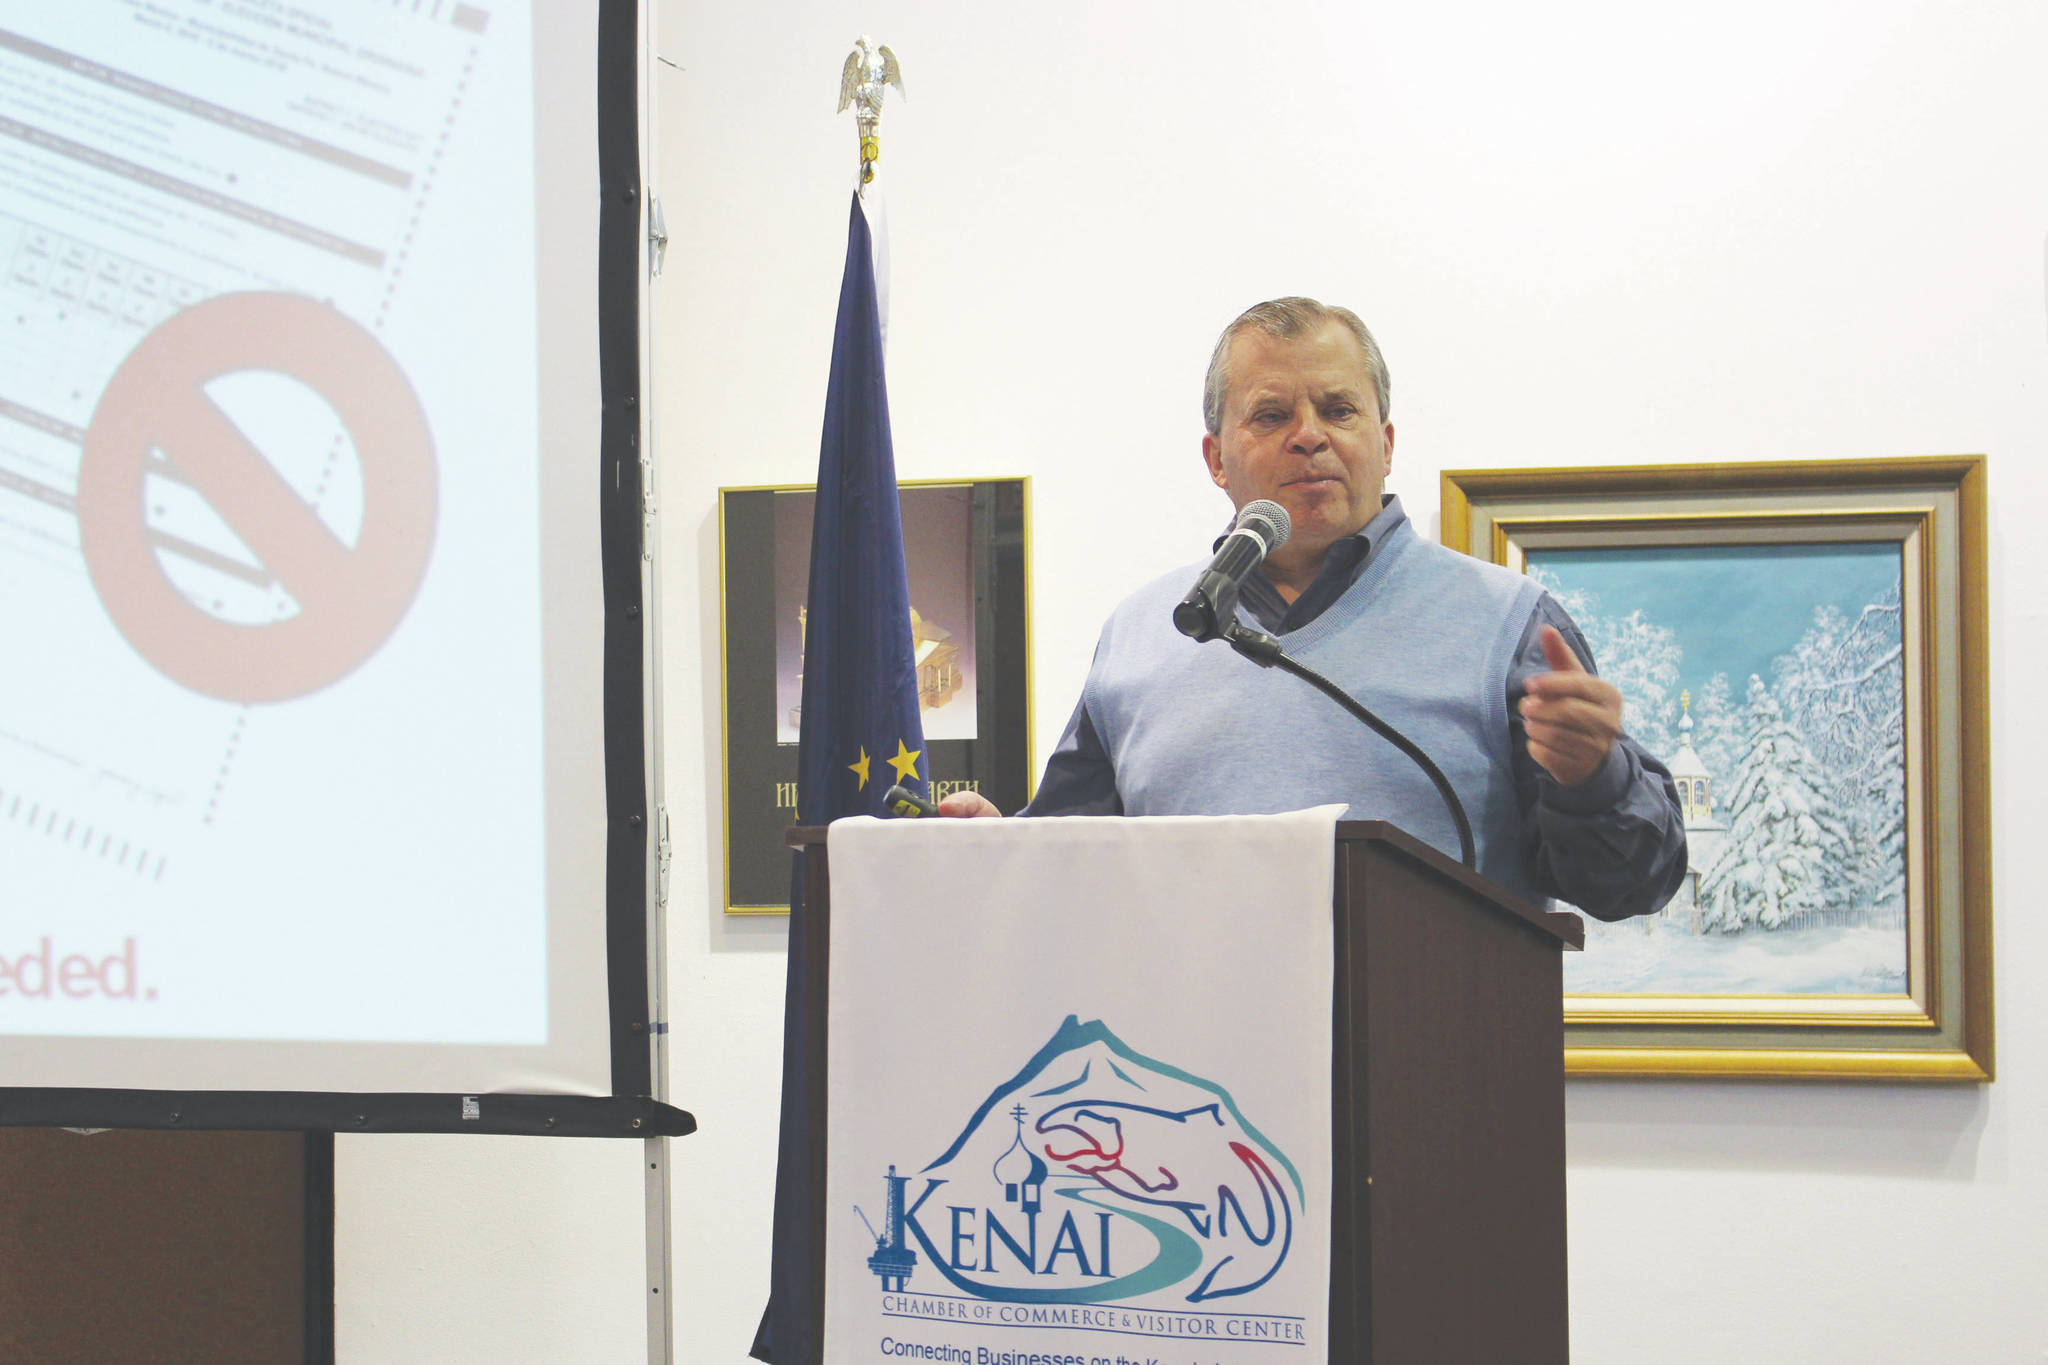 Tim Navarre argues against Ballot Measure 2 during the Kenai and Soldotna Chambers of Commerce Joint Luncheon at the Kenai Visitor and Cultural Center on Wednesday. (Photo by Brian Mazurek/Peninsula Clarion)